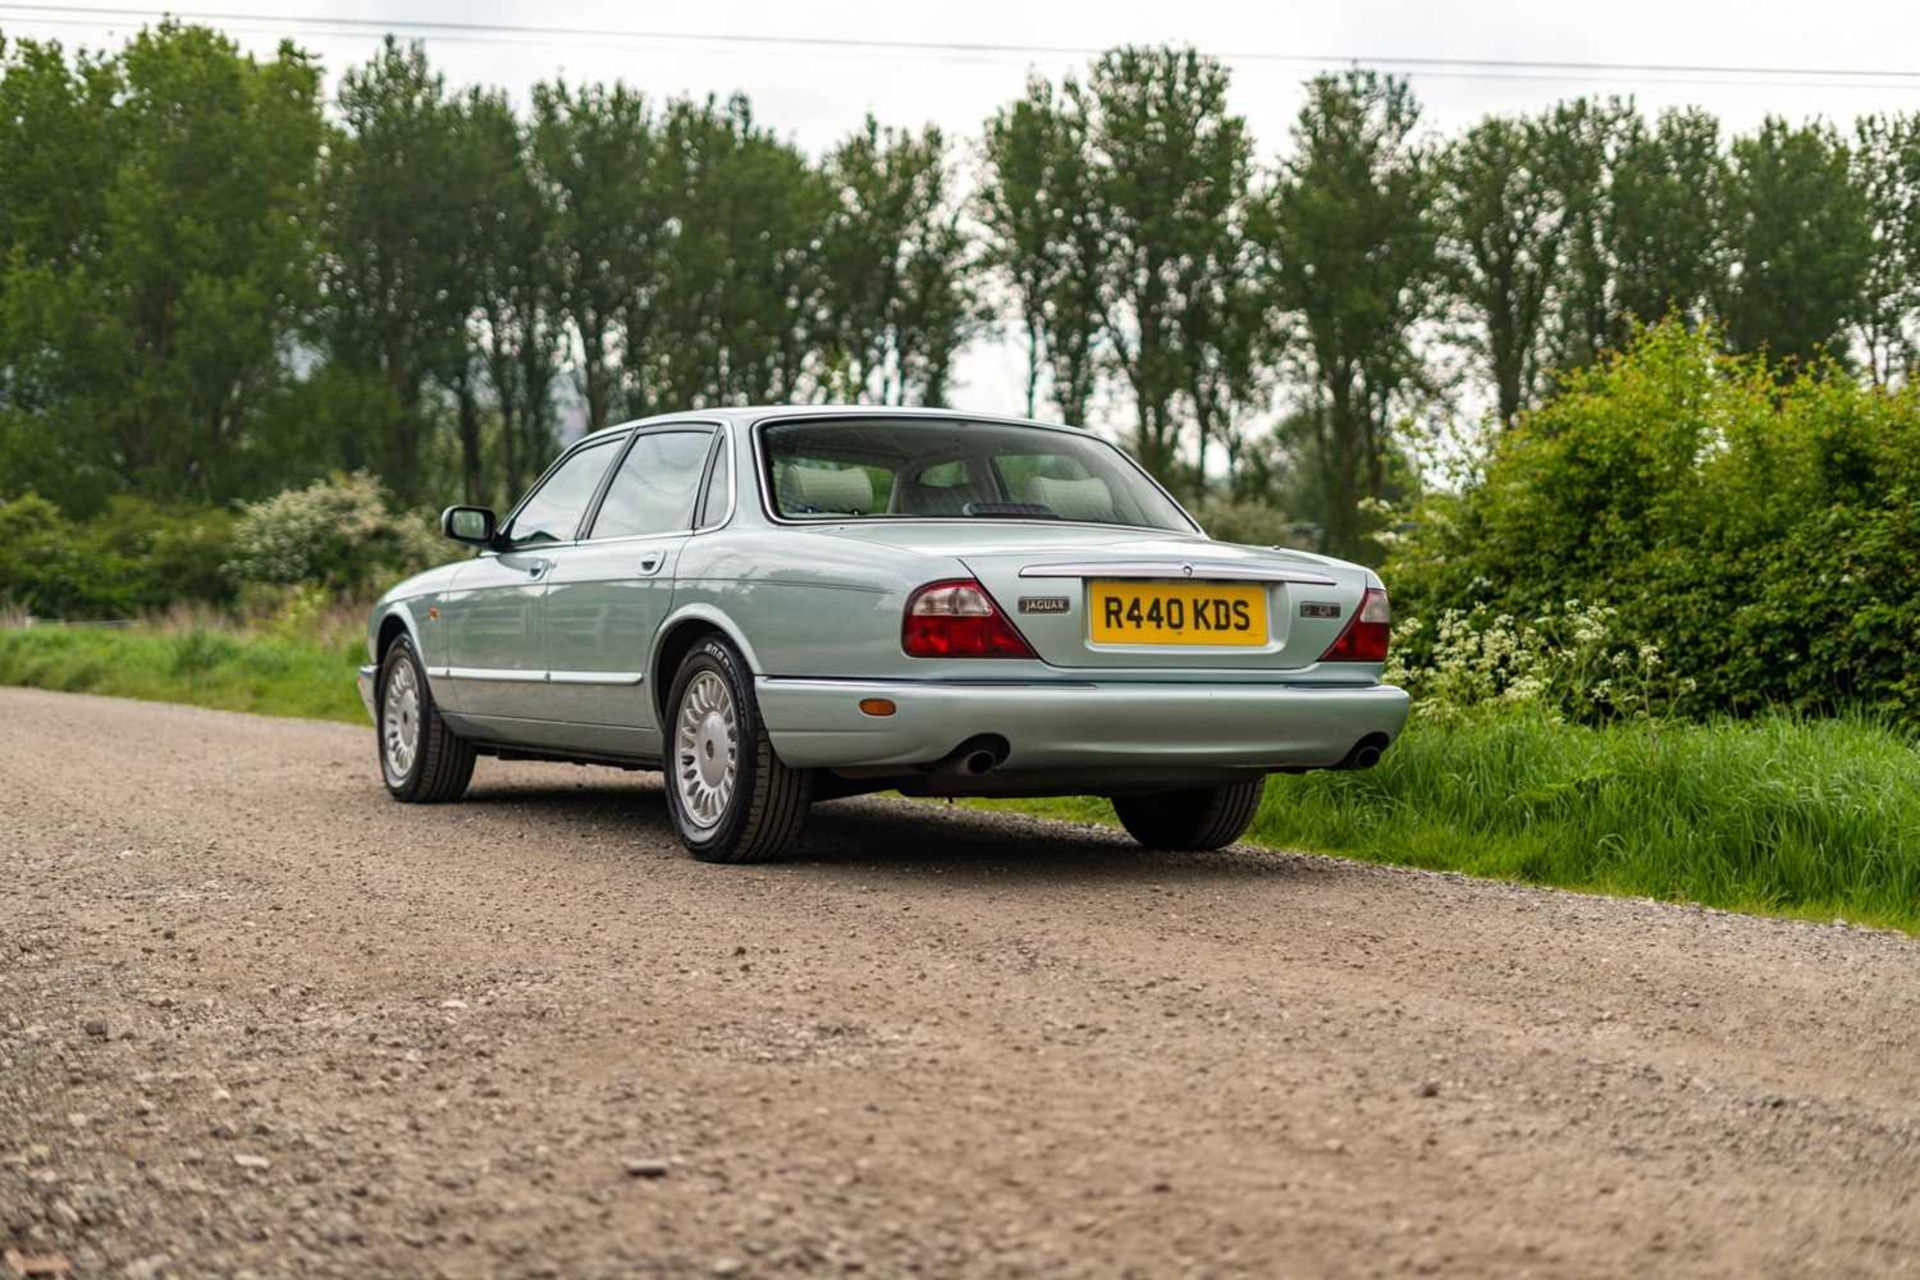 1998 Jaguar XJ8 ***NO RESERVE*** Just 40,000 miles from new and 1 owner from new - Image 10 of 58